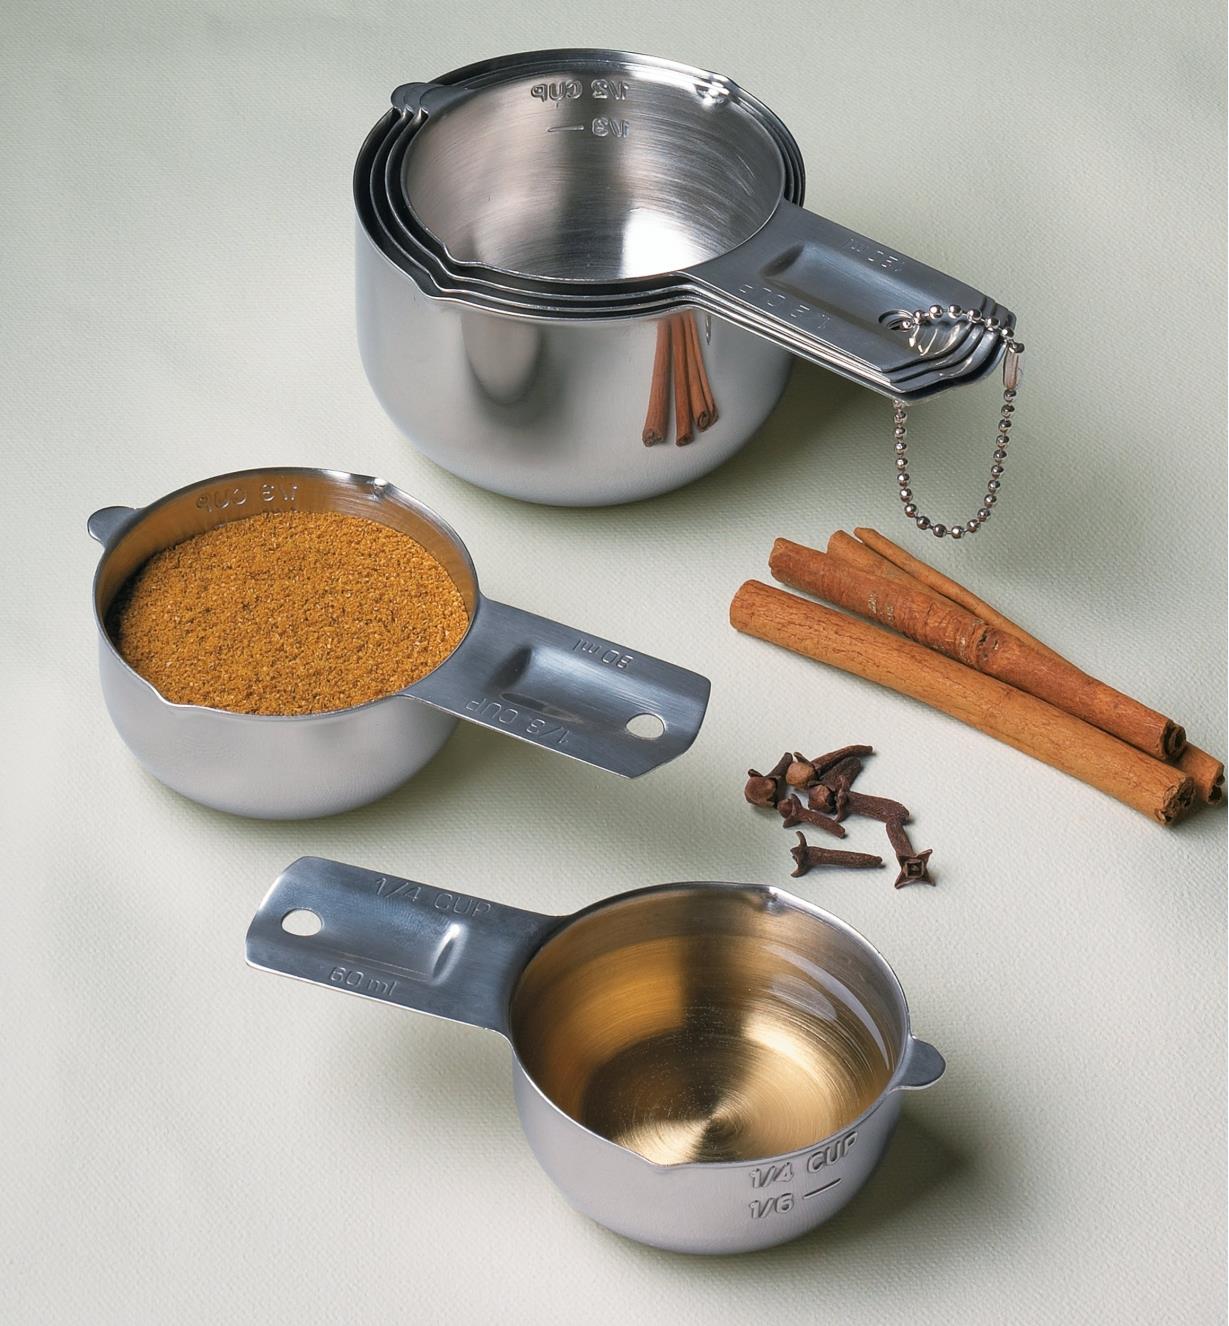 Set of 6 Lifetime Measuring Cups, one filled with ground cinnamon and another with oil